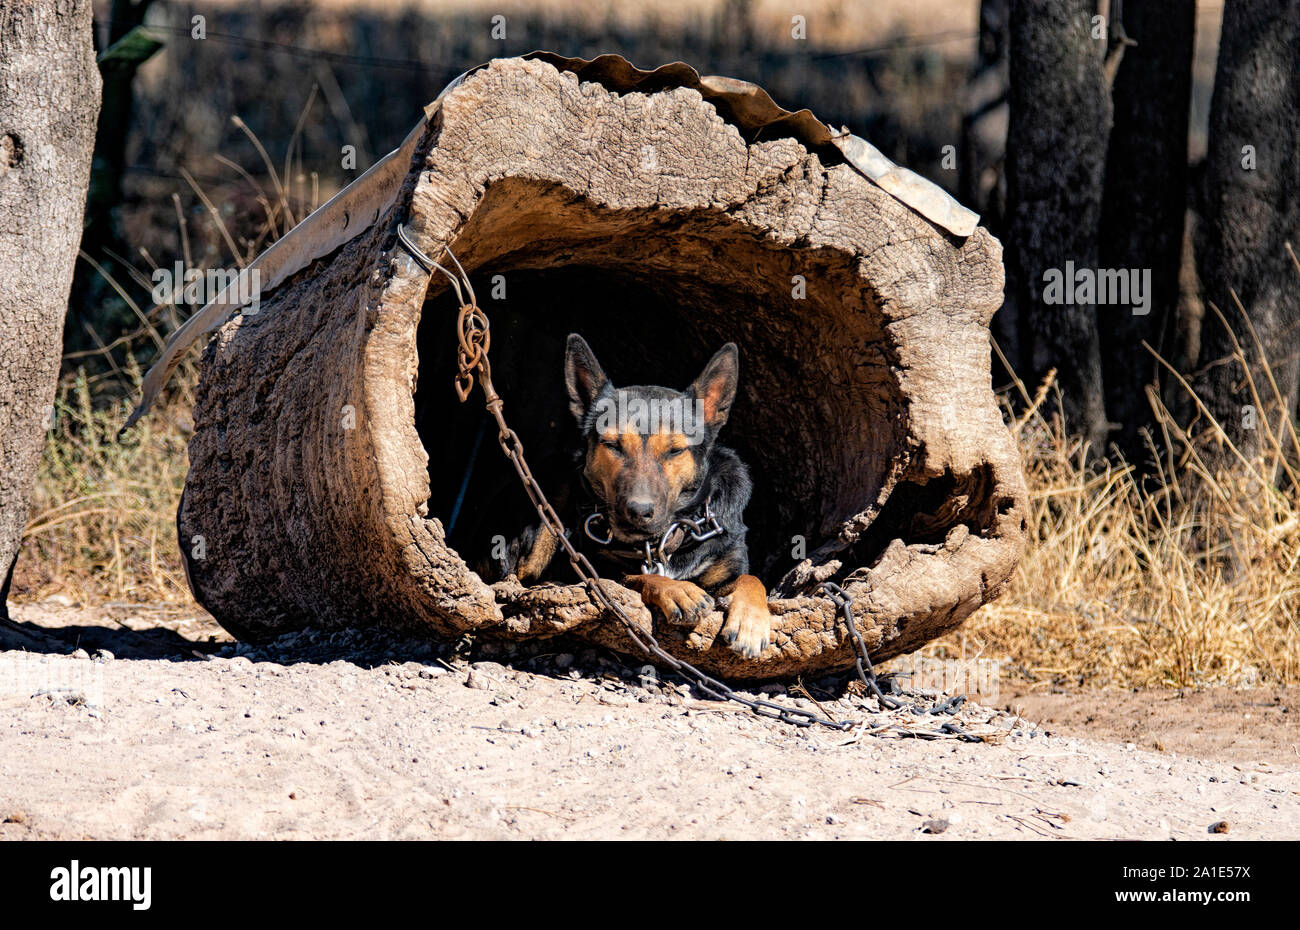 Australian farm working dog resting in its kennel which is a section of a hollow tree trundk Stock Photo